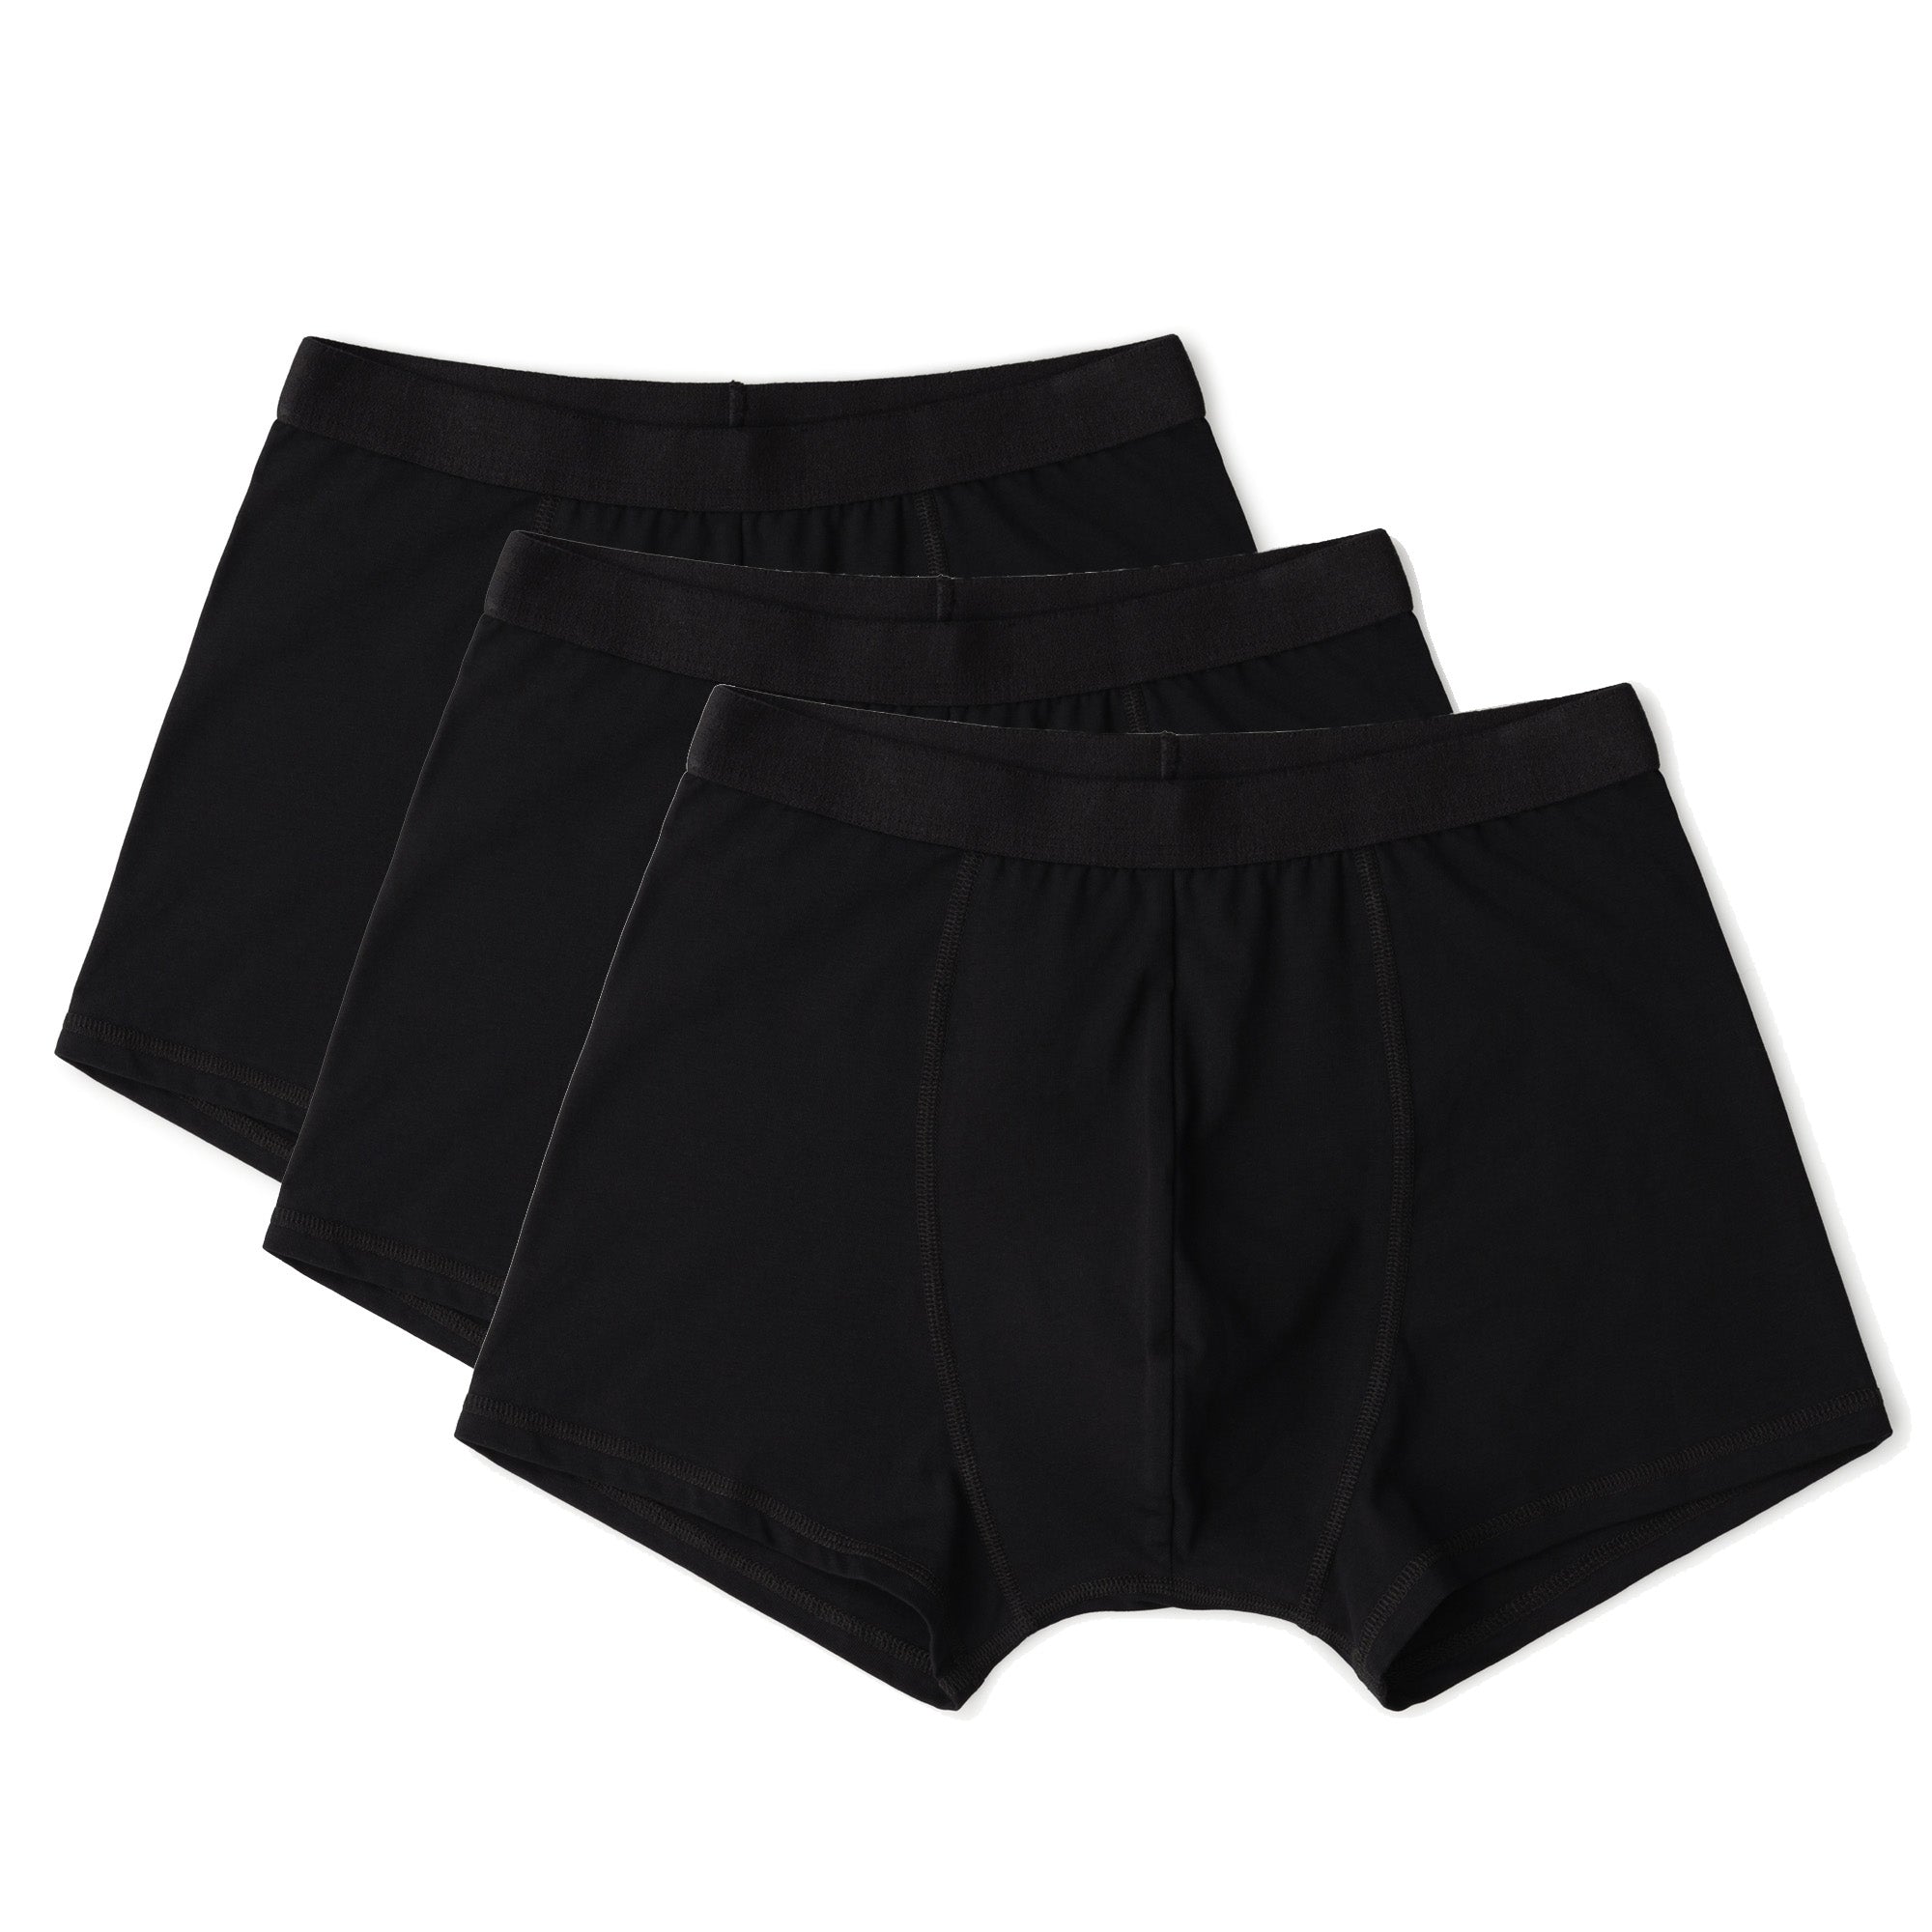 3 pack of black full briefs in organic cotton